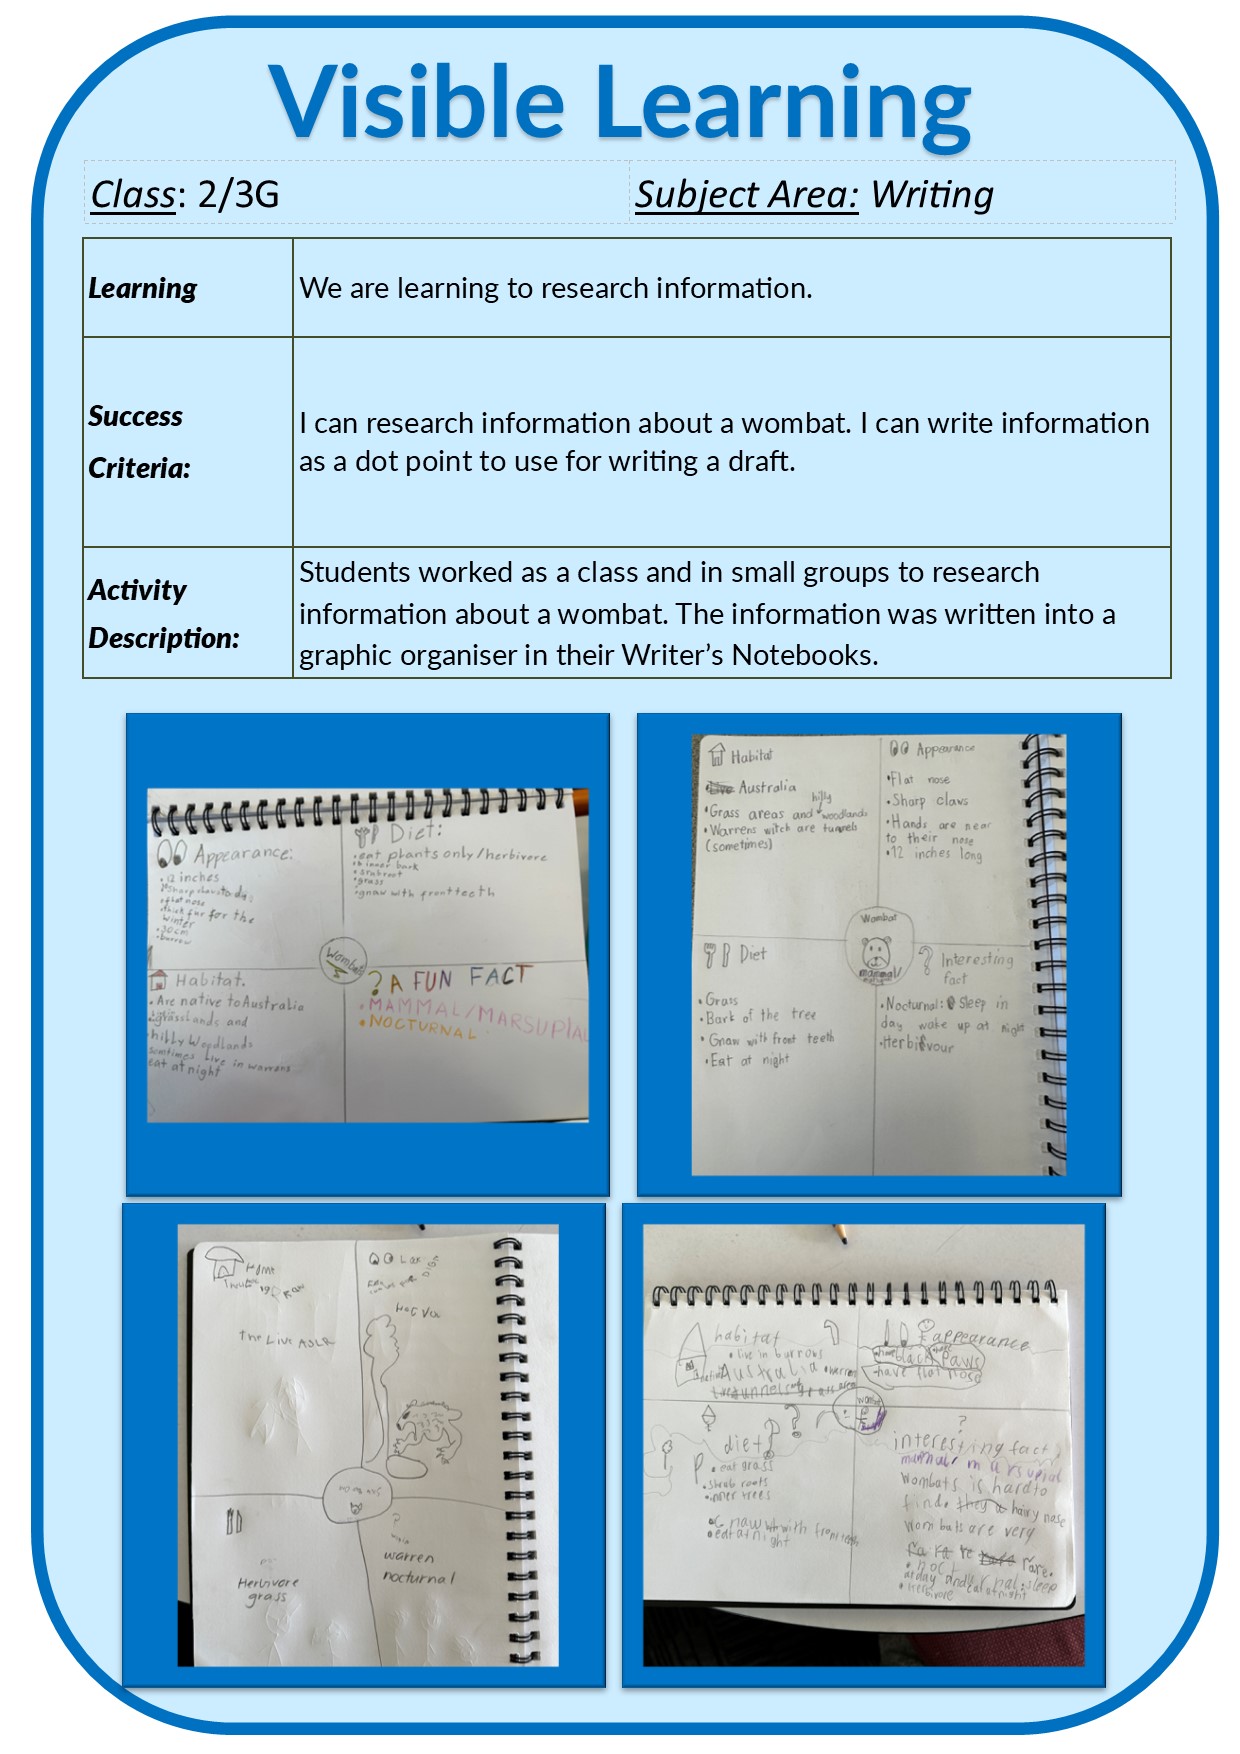 Visible Learning/23G Term 2 Writing.jpg